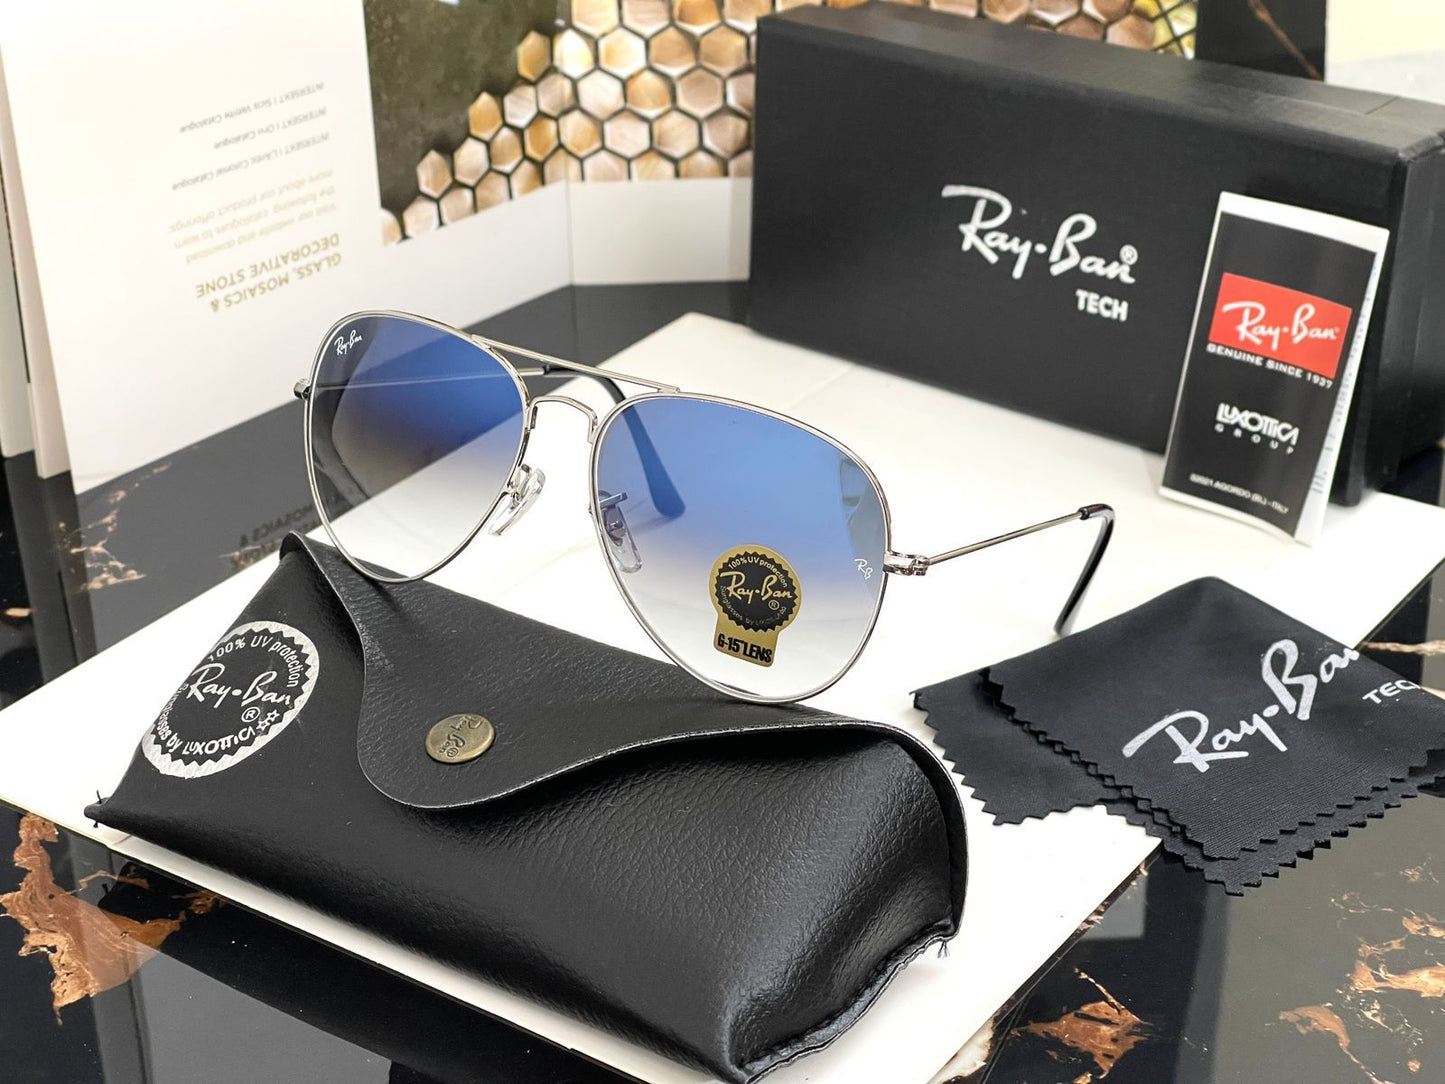 RAY-BAN Blue Shade & Silver 3026 Oval Aviator Metal Trendy Hot Favourite Wintage Sunglass For Unisex.